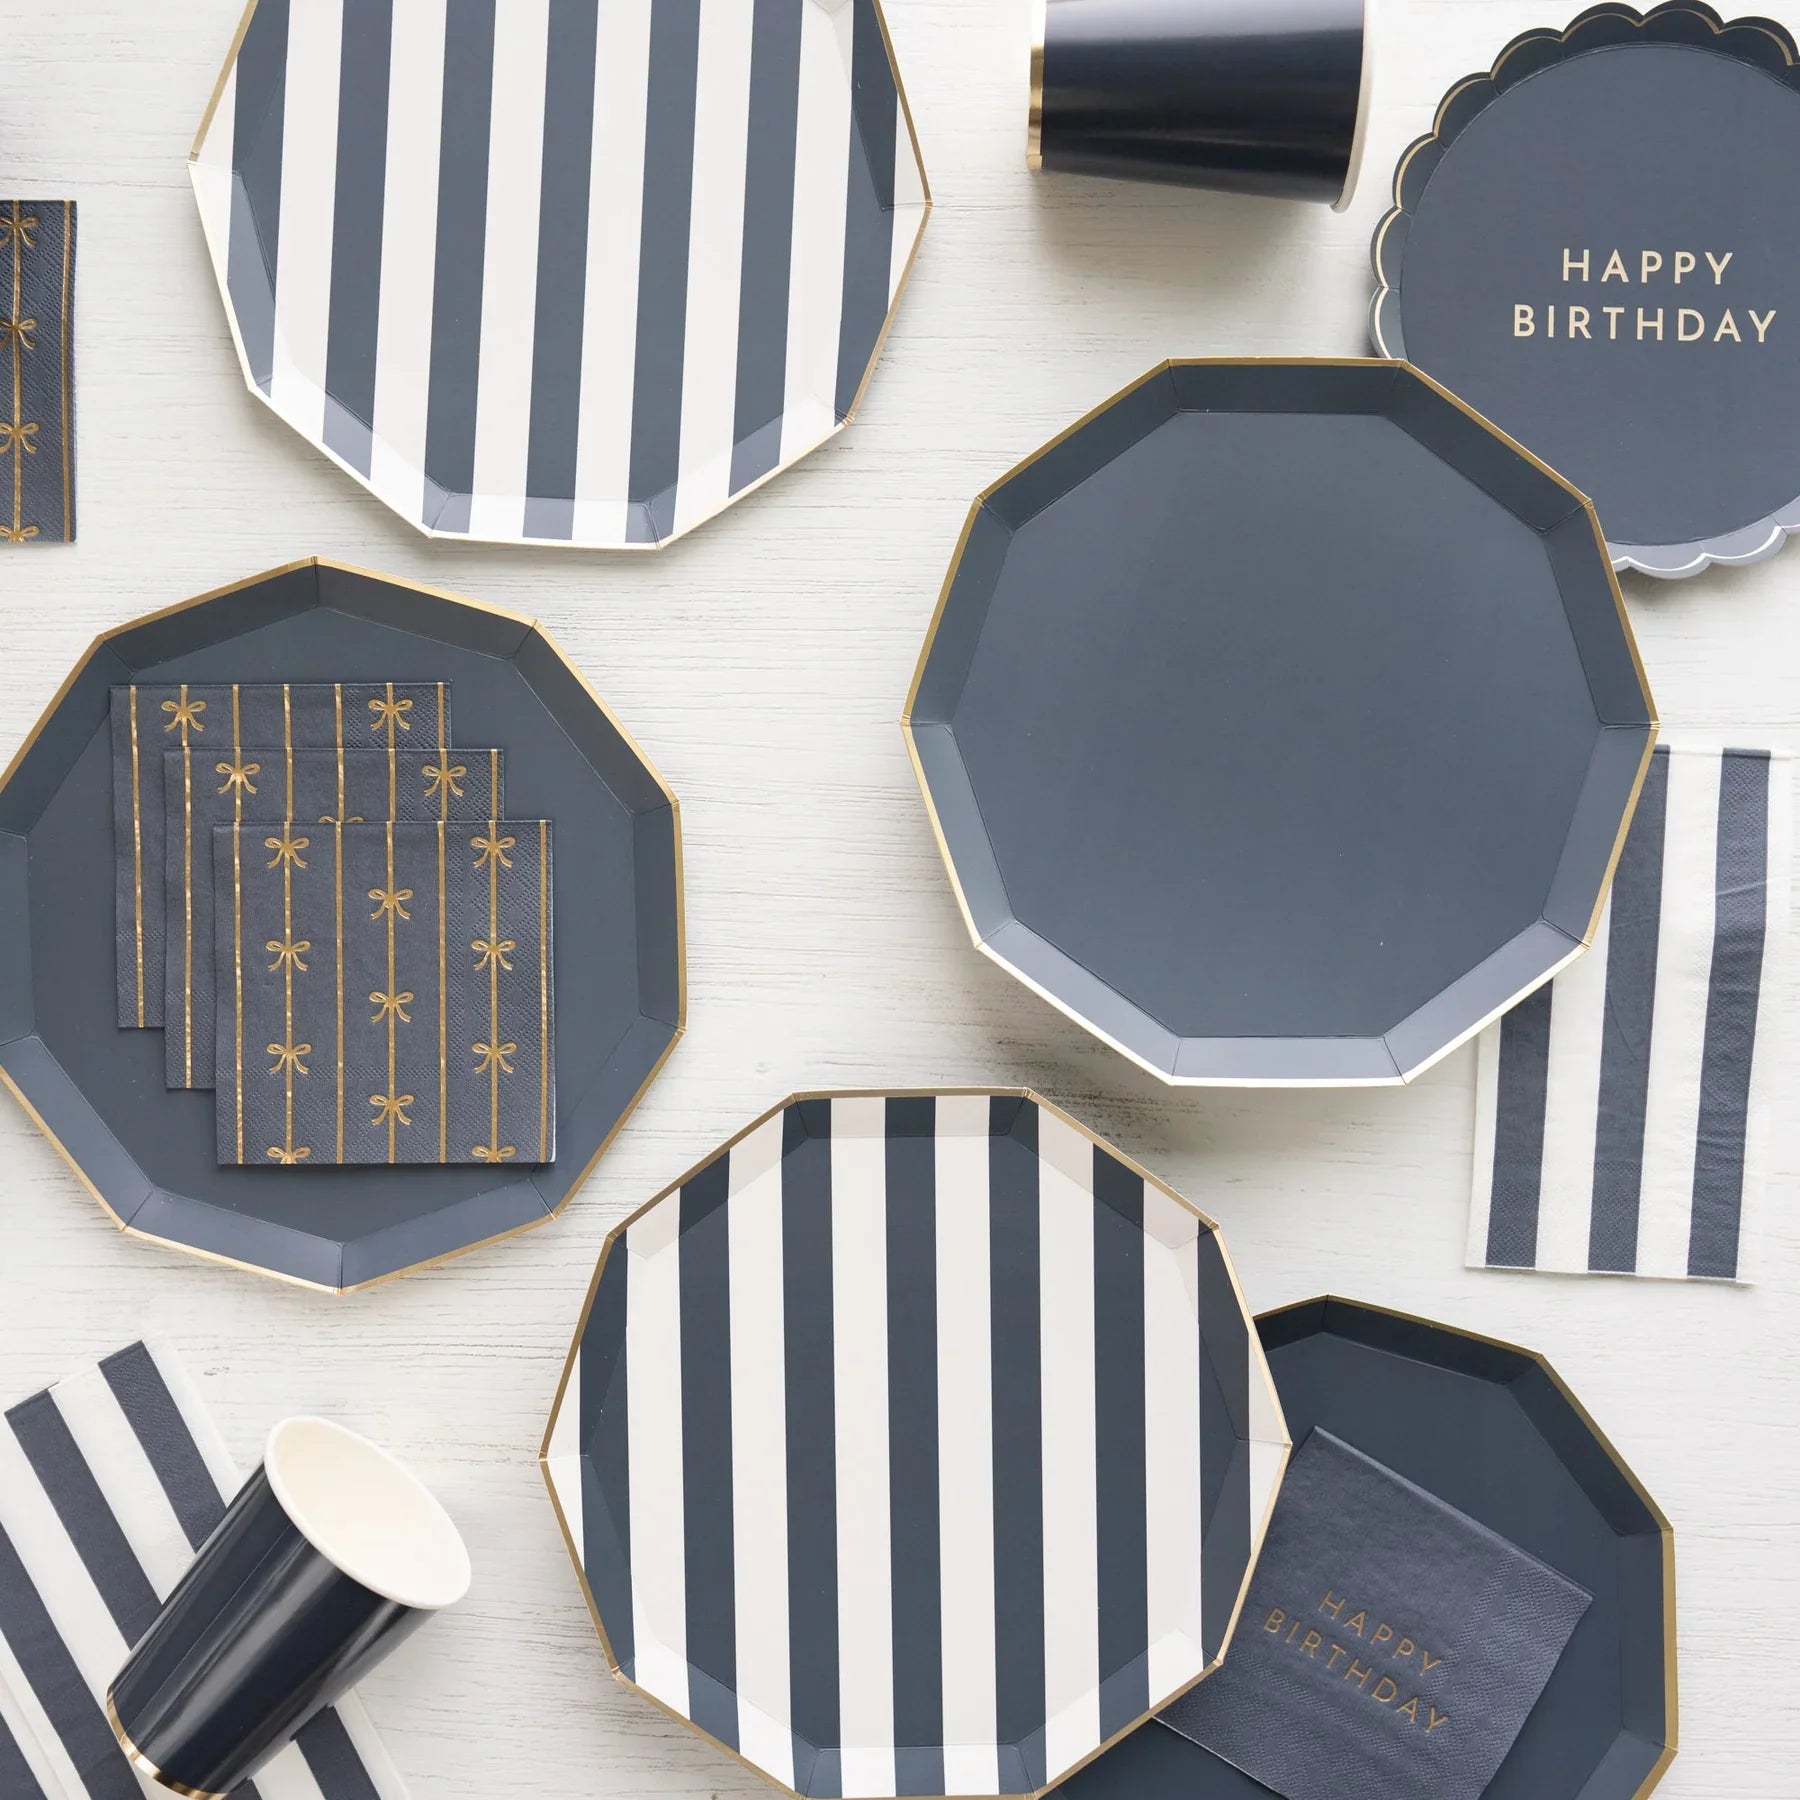 Midnight Blue Cabana Striped Dinner Plates 8ct | The Party Darling